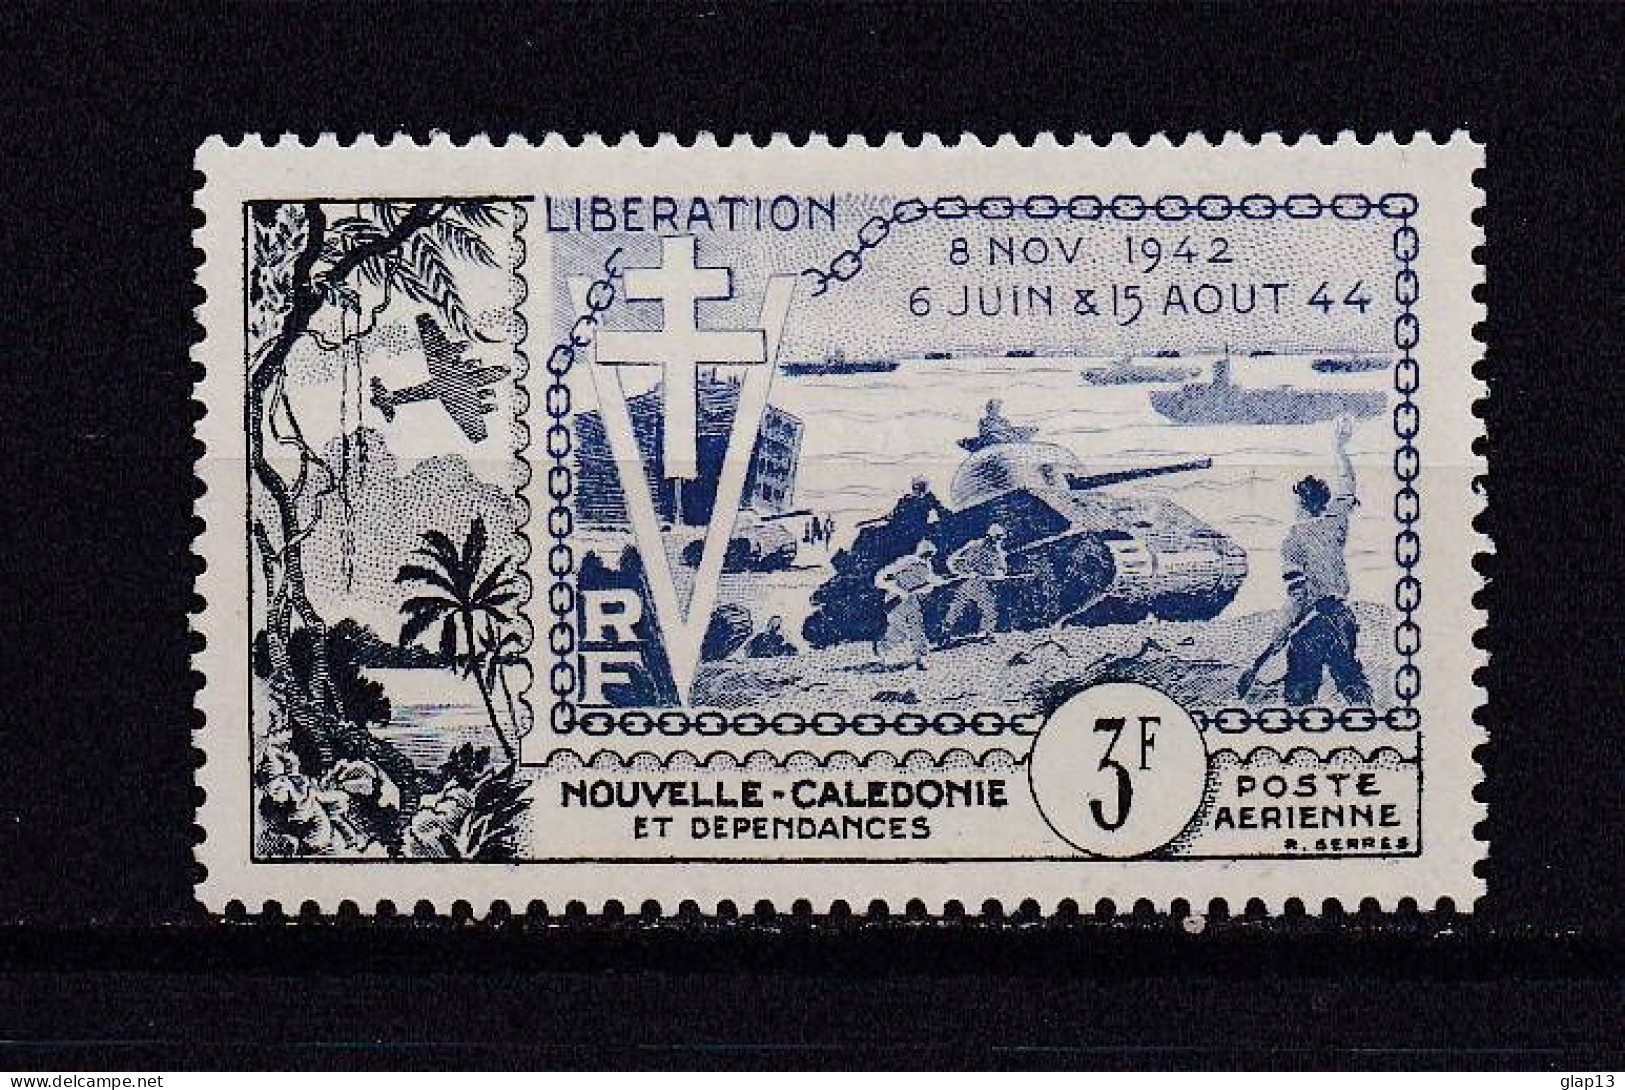 NOUVELLE-CALEDONIE 1954 PA N°65 NEUF AVEC CHARNIERE LIBERATION - Unused Stamps